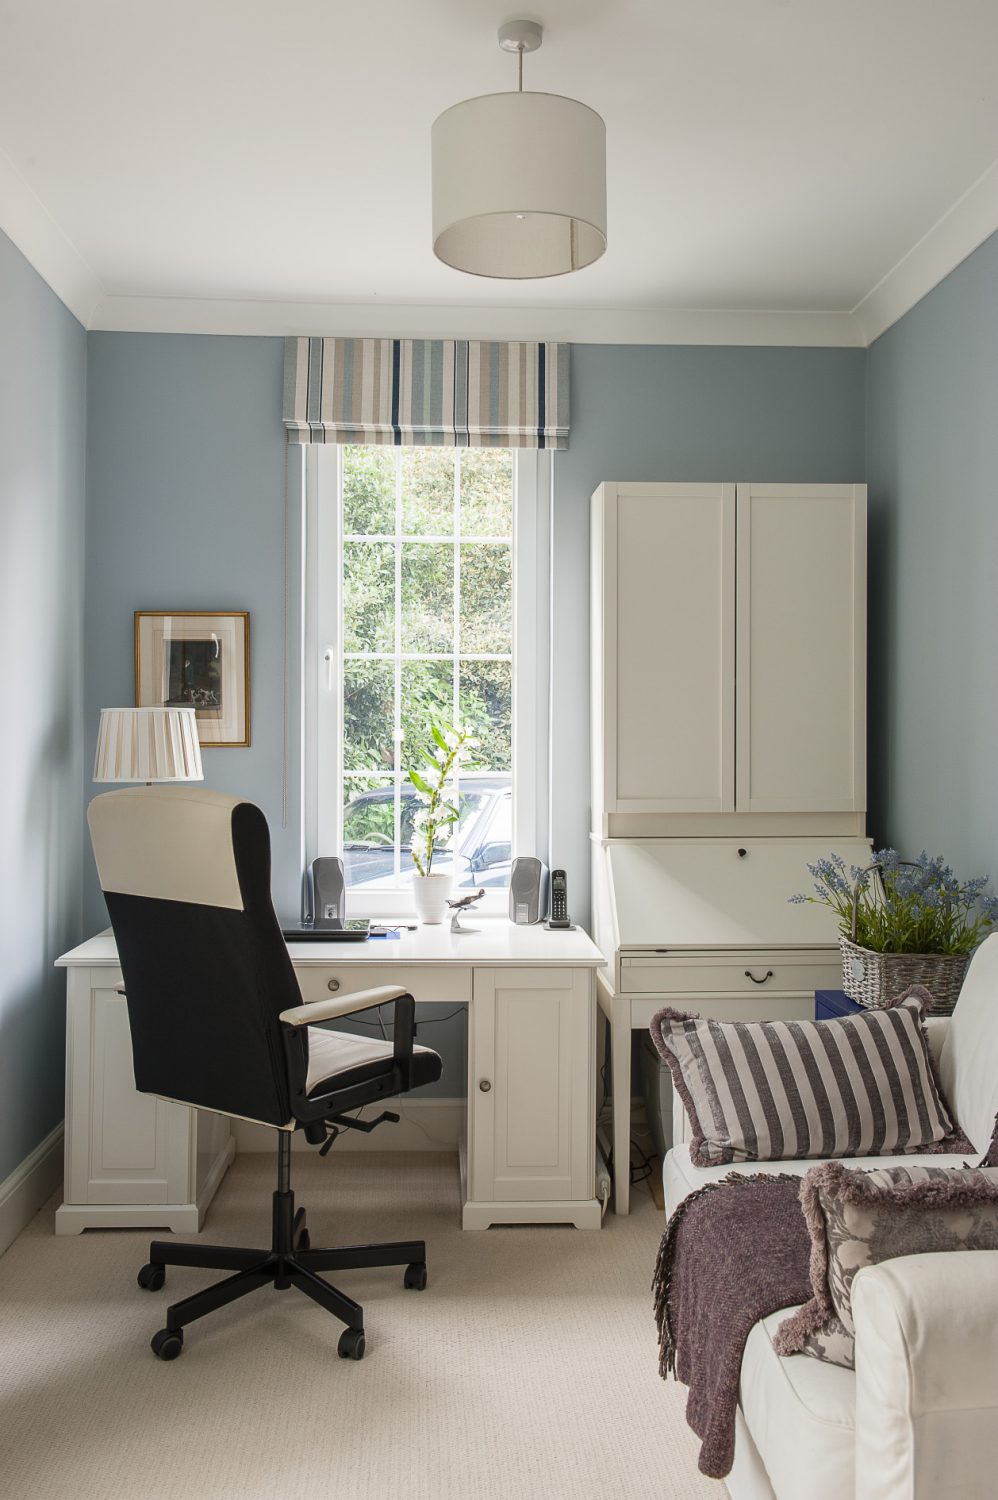 The study is painted in a cool blue and furnished simply with white painted bureau and desk